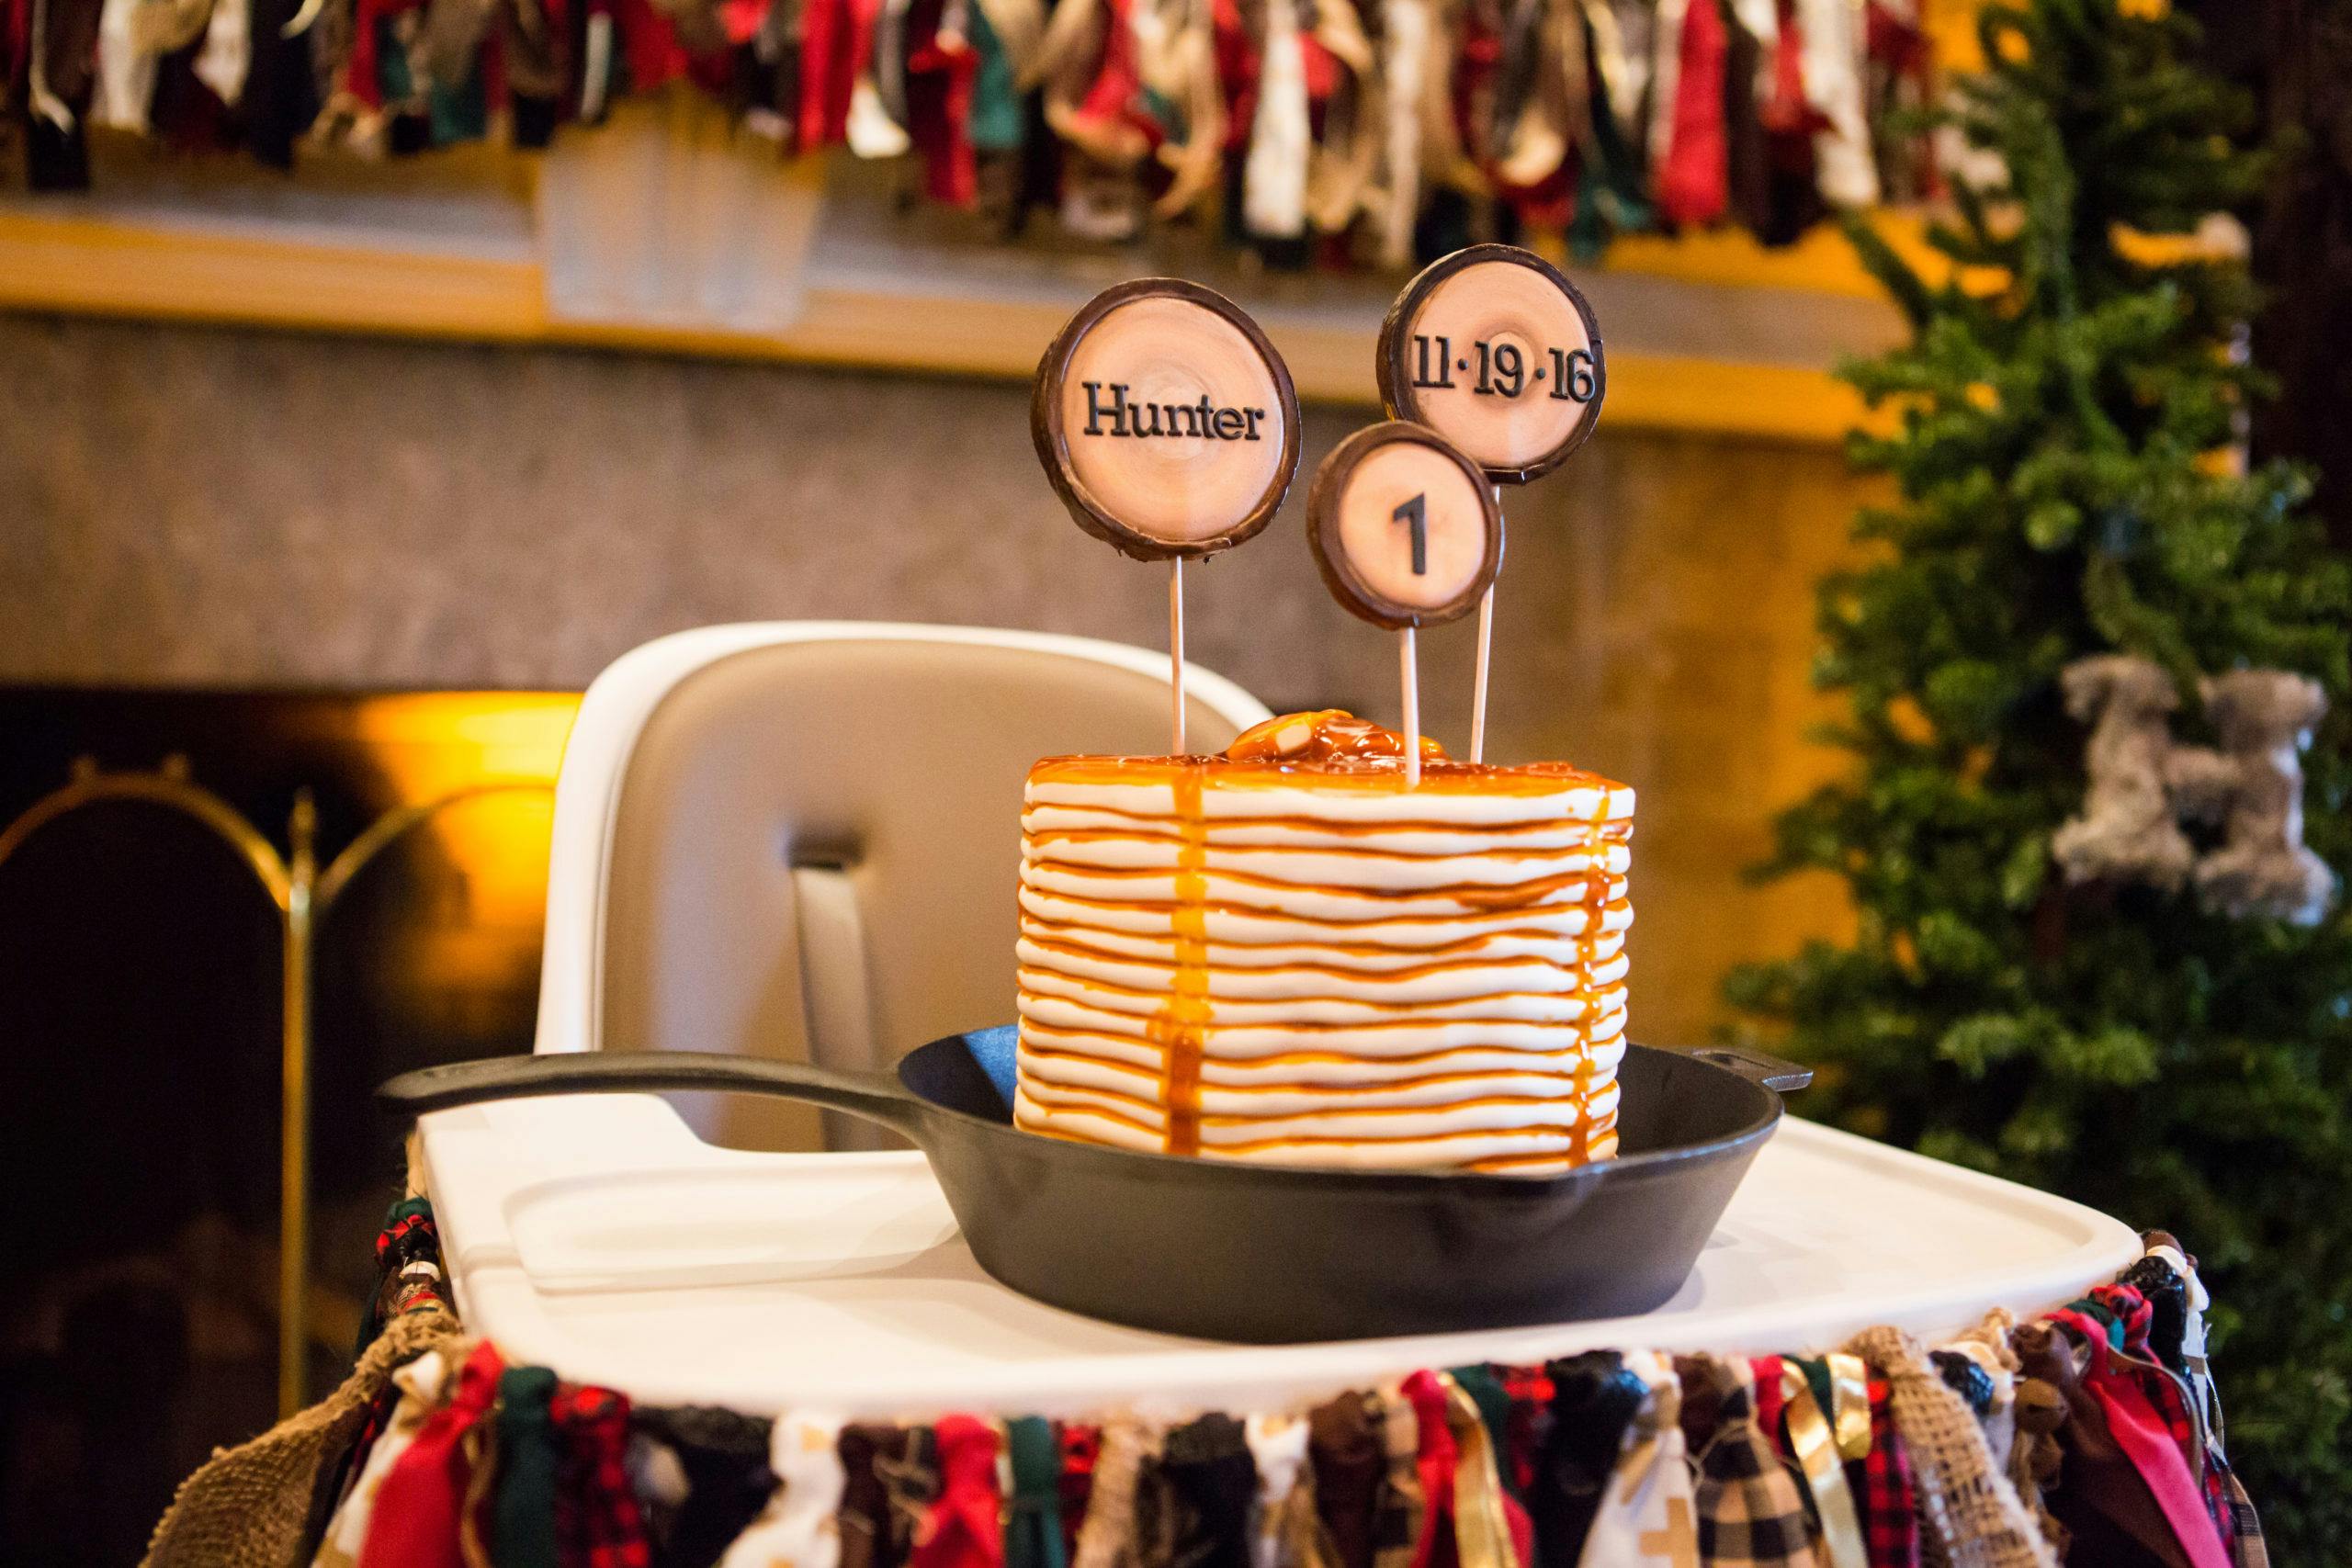 Kids Lumberjack Themed 1st Birthday Party with Flapjack Cake Sitting on a High Chair | PartySlate